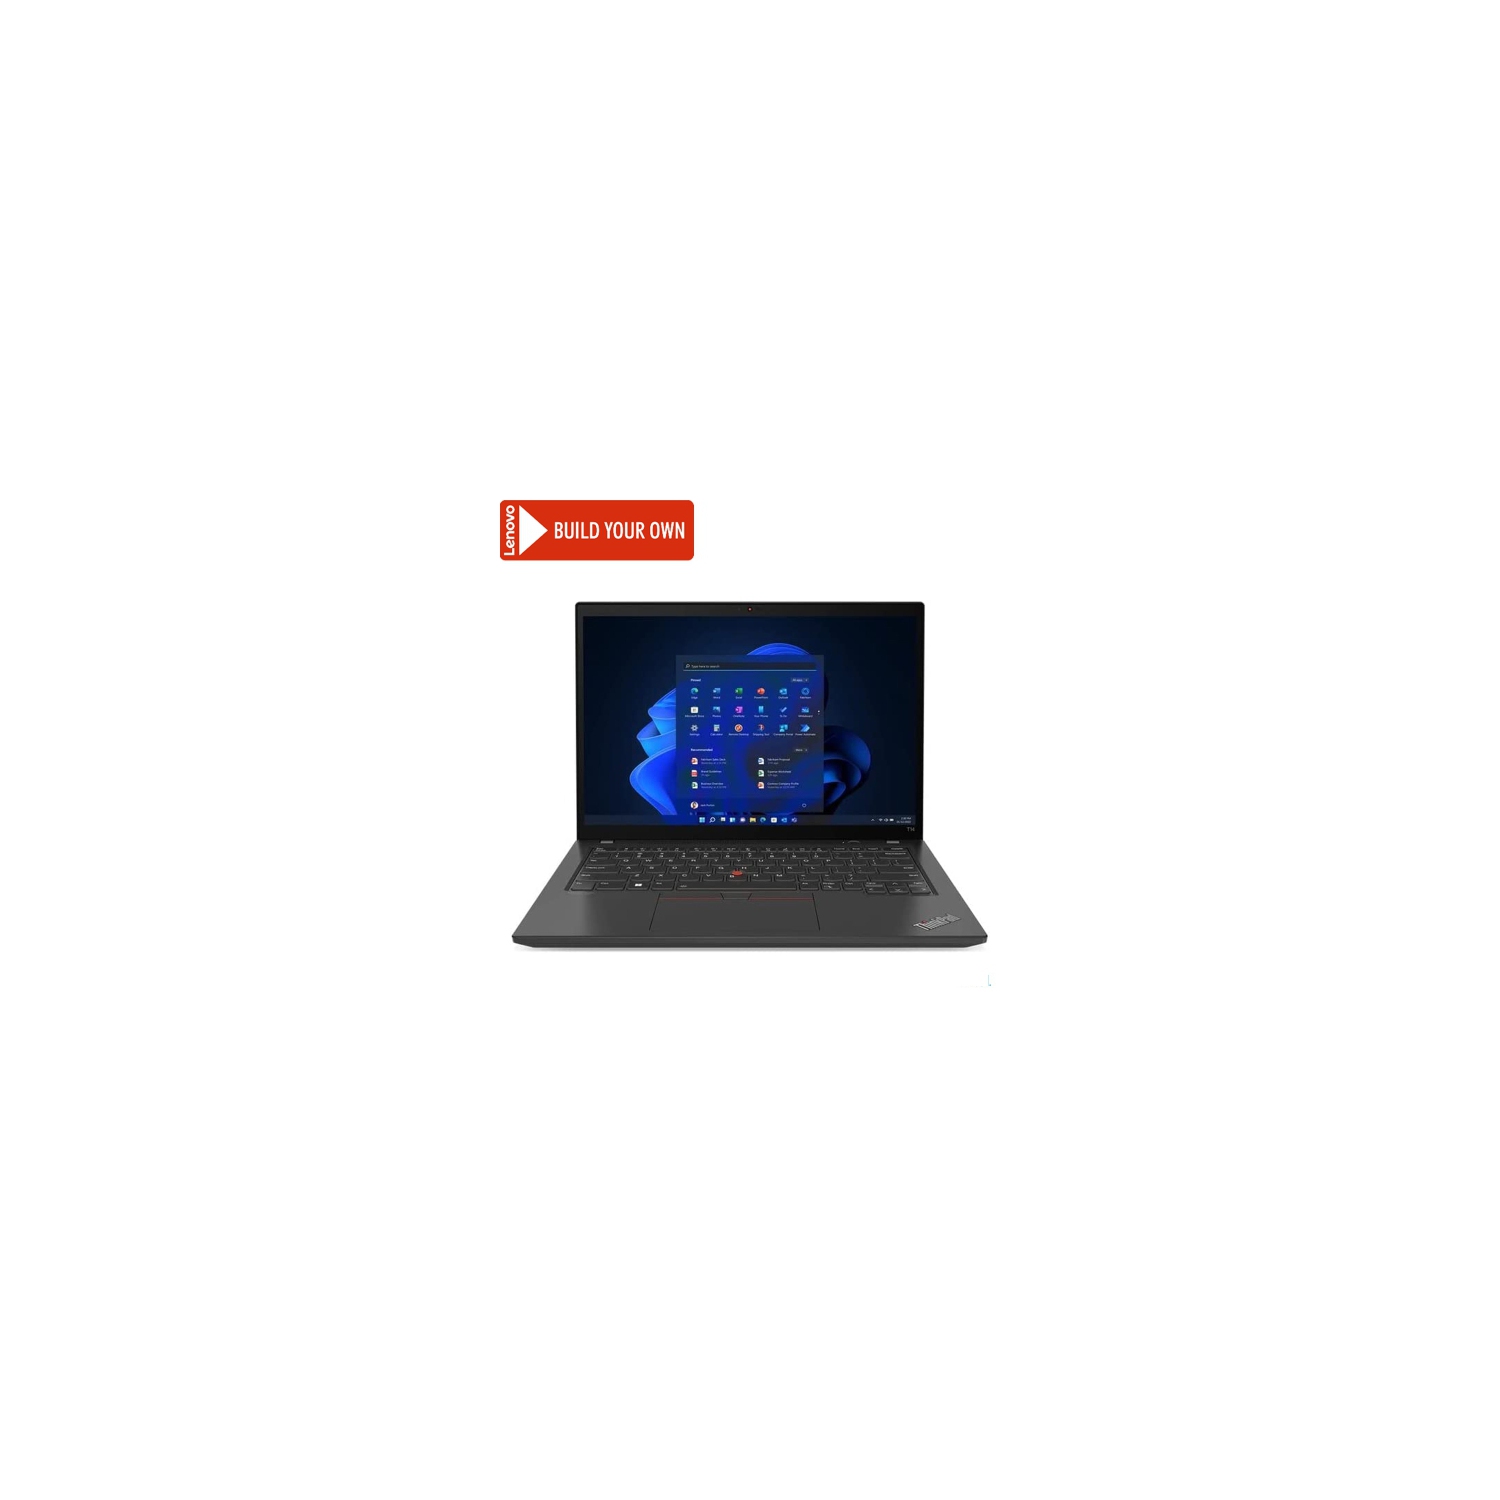 Refurbished (Excellent) Lenovo ThinkPad T14 Gen 1 14" FHD INtel Quad Core i5 10310U up to 4.2 GHz 16GB DDR4 256GB SSD Win 11 Pro W/Mouse and Mouse pad